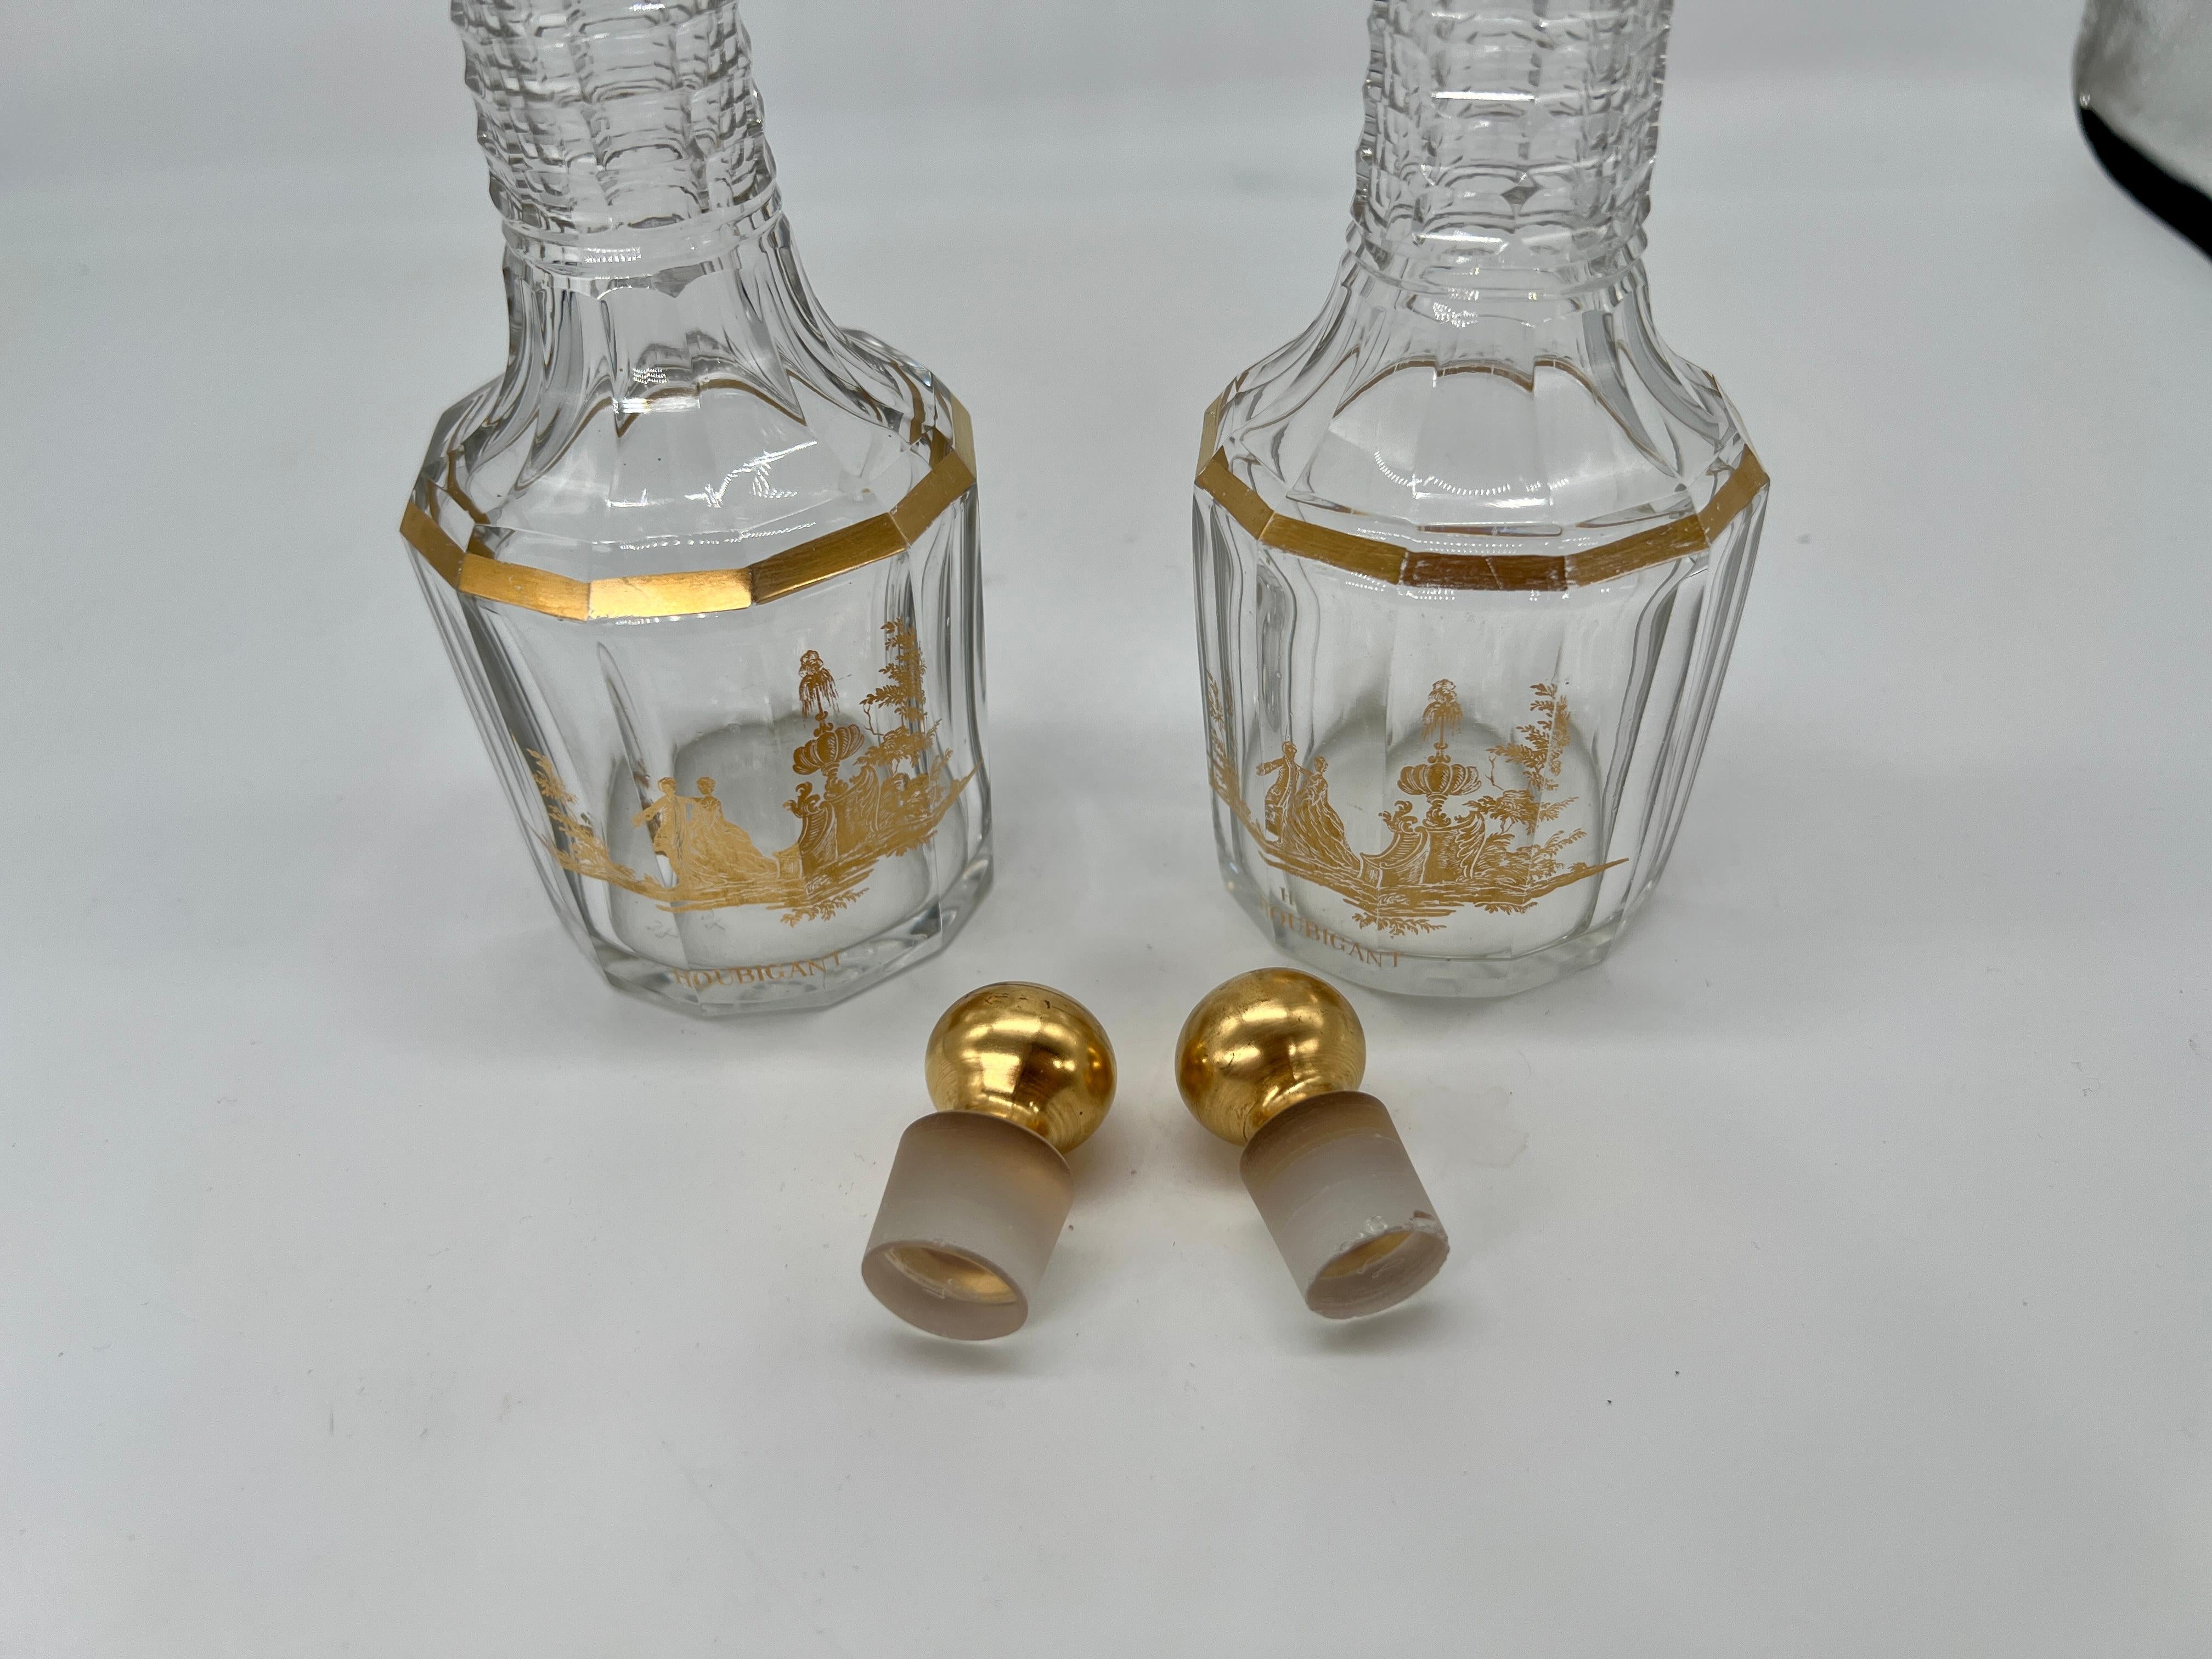 Pair, Antique French Baccarat Houbigant Gilt Crystal Perfume Bottles C. 1920 For Sale 1